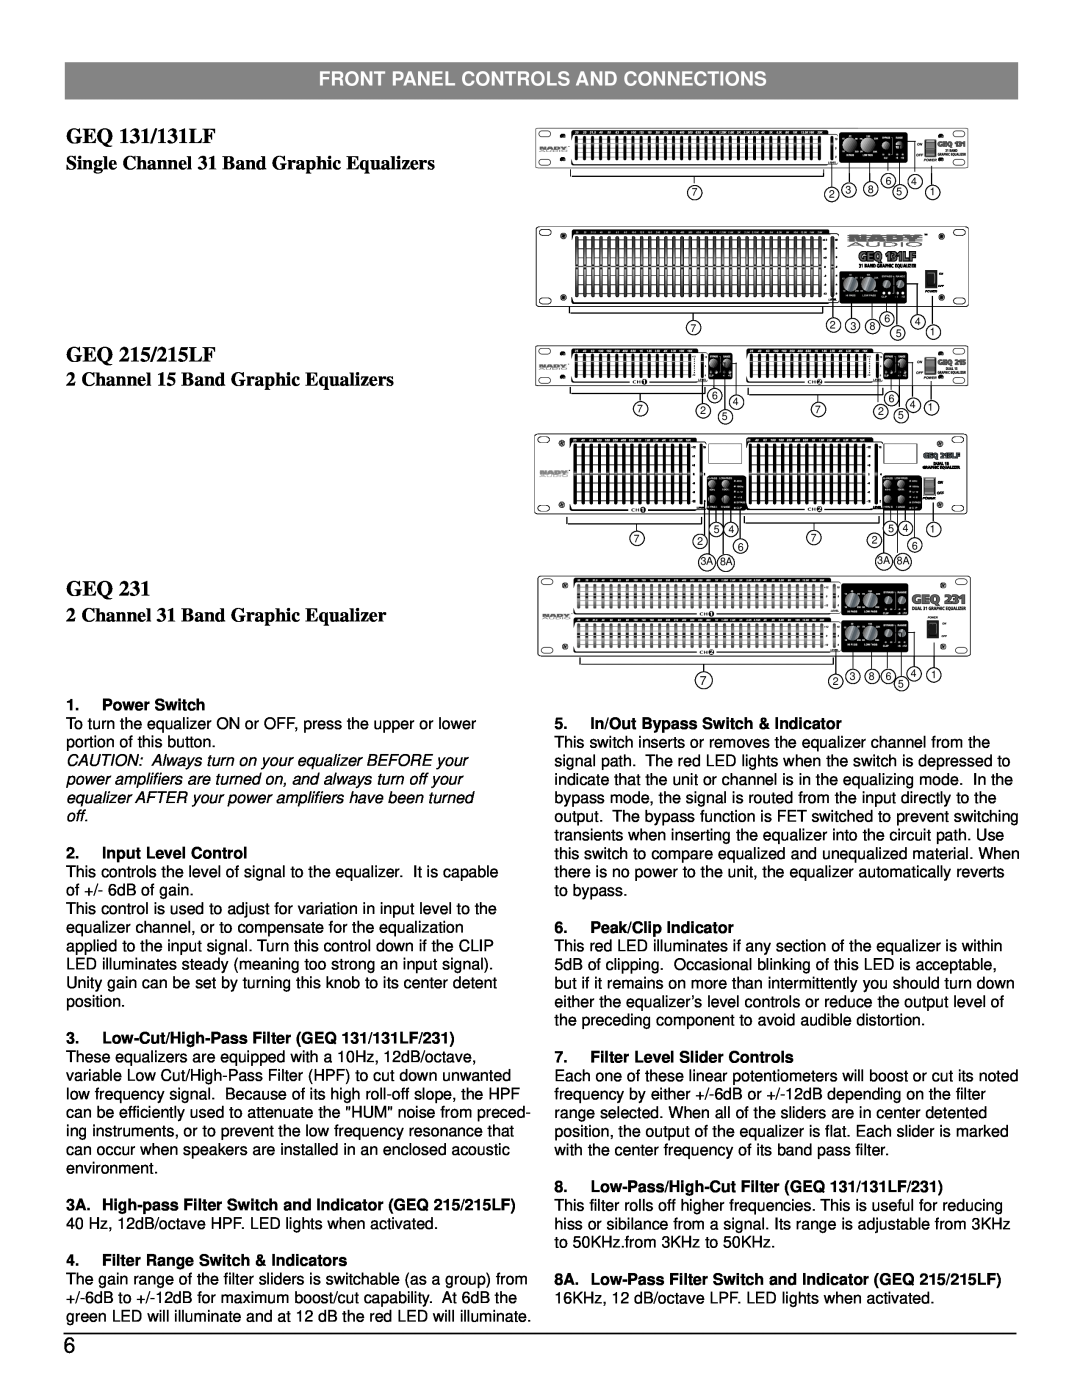 Nady Systems GEQ 131LF, GEQ 231, GEQ 215LF owner manual GEQ 131/131LF, GEQ 215/215LF, Front Panel Controls And Connections 